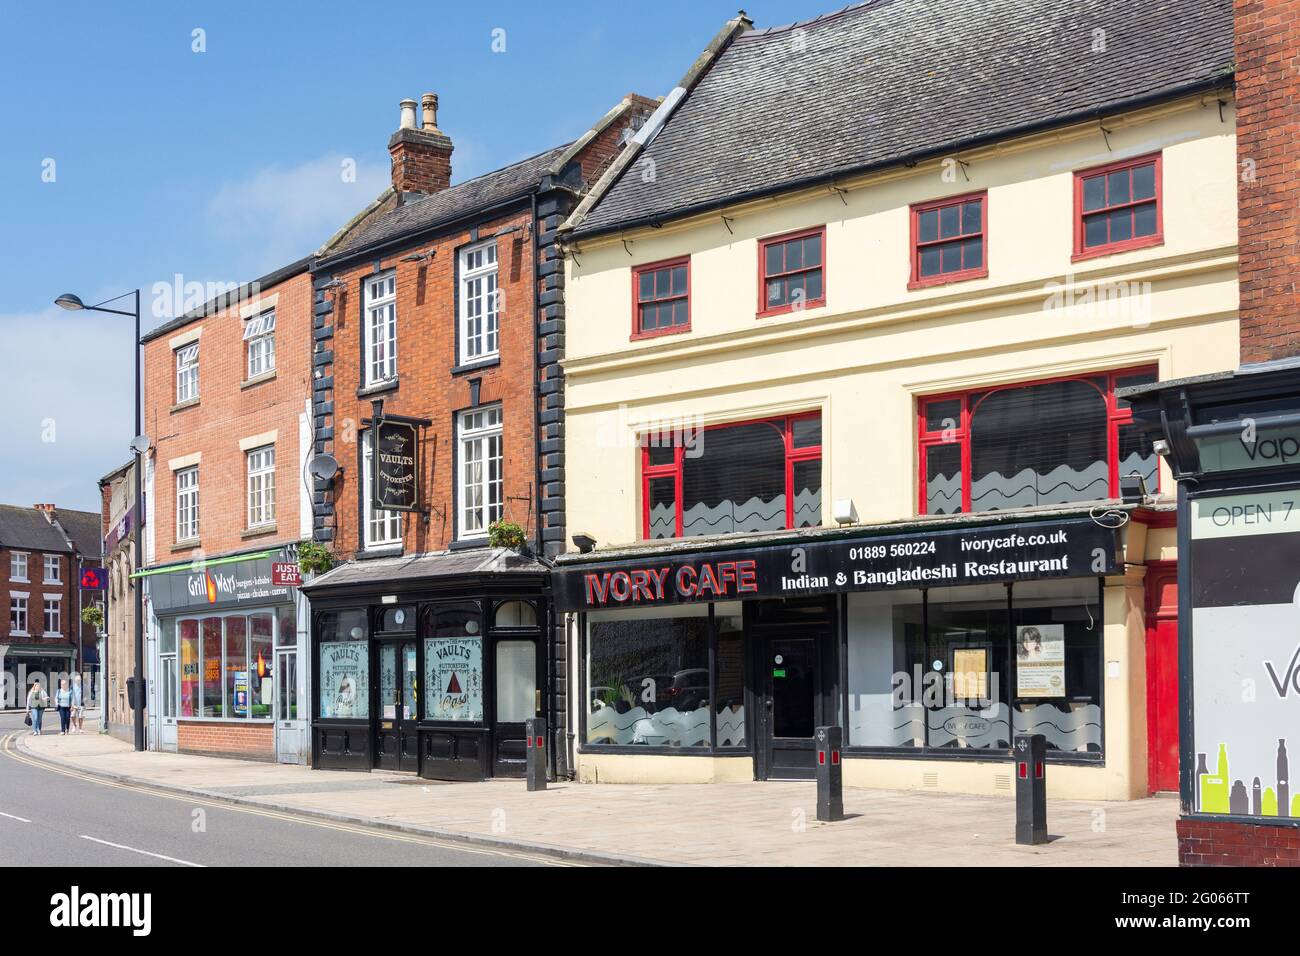 Shops and restaurants, Market Place, Uttoxeter, Staffordshire, England, United Kingdom Stock Photo